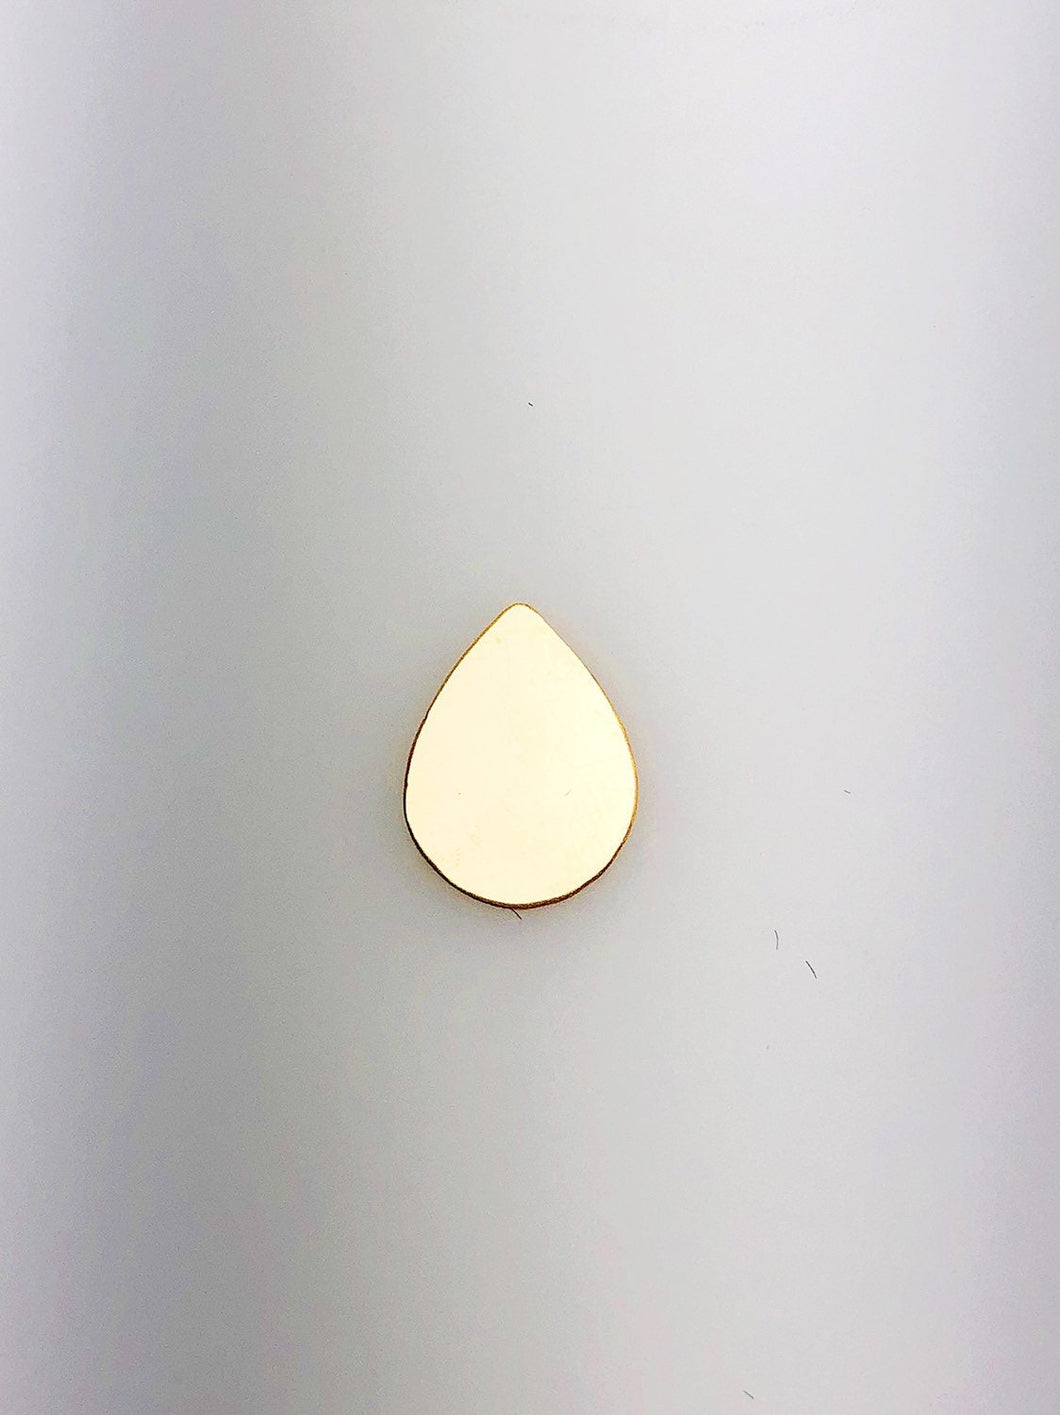 14K Gold Fill Tear Drop Tag Charm w/out Ring, 9.7x13.0mm, Made in USA - 376